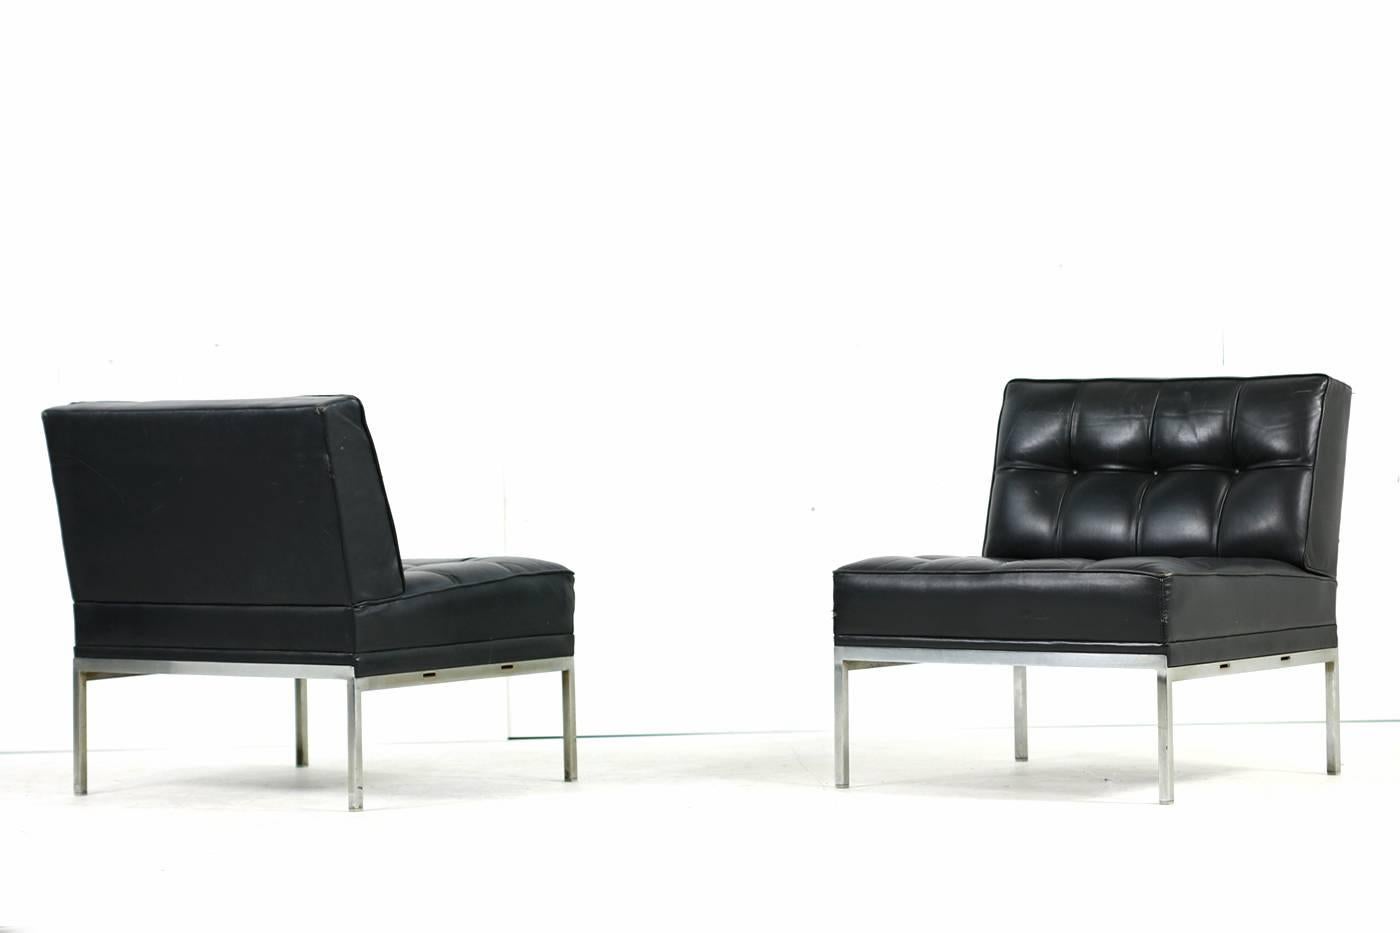 Pair of 1960s Johannes Spalt Constanze Lounge Chairs Wittmann Steel & Leather 1